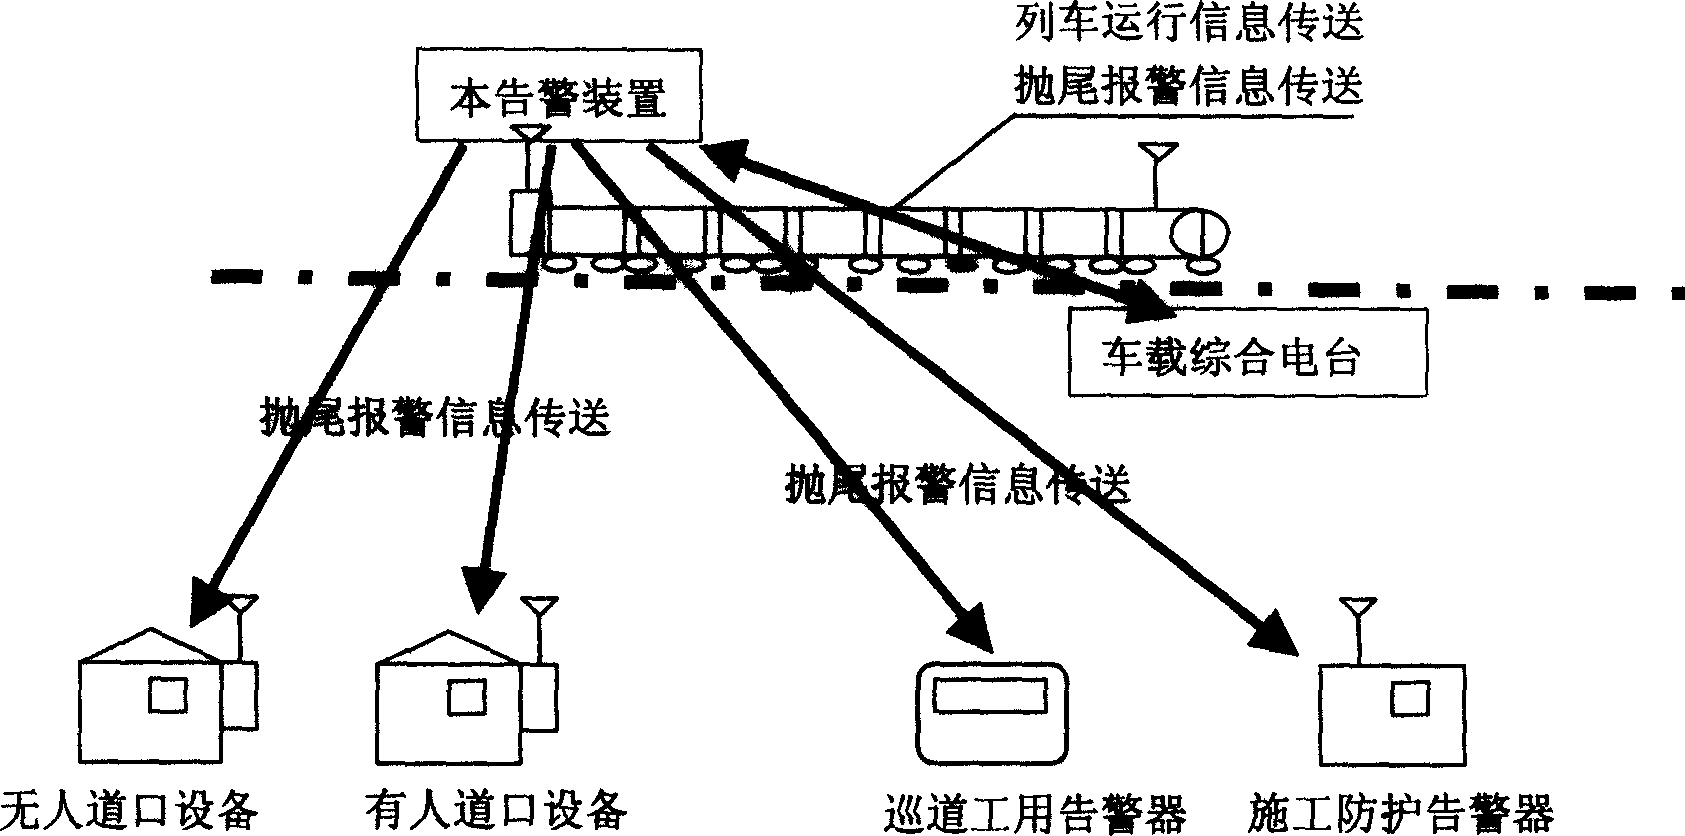 Method for testing out of order for running train and alarm device